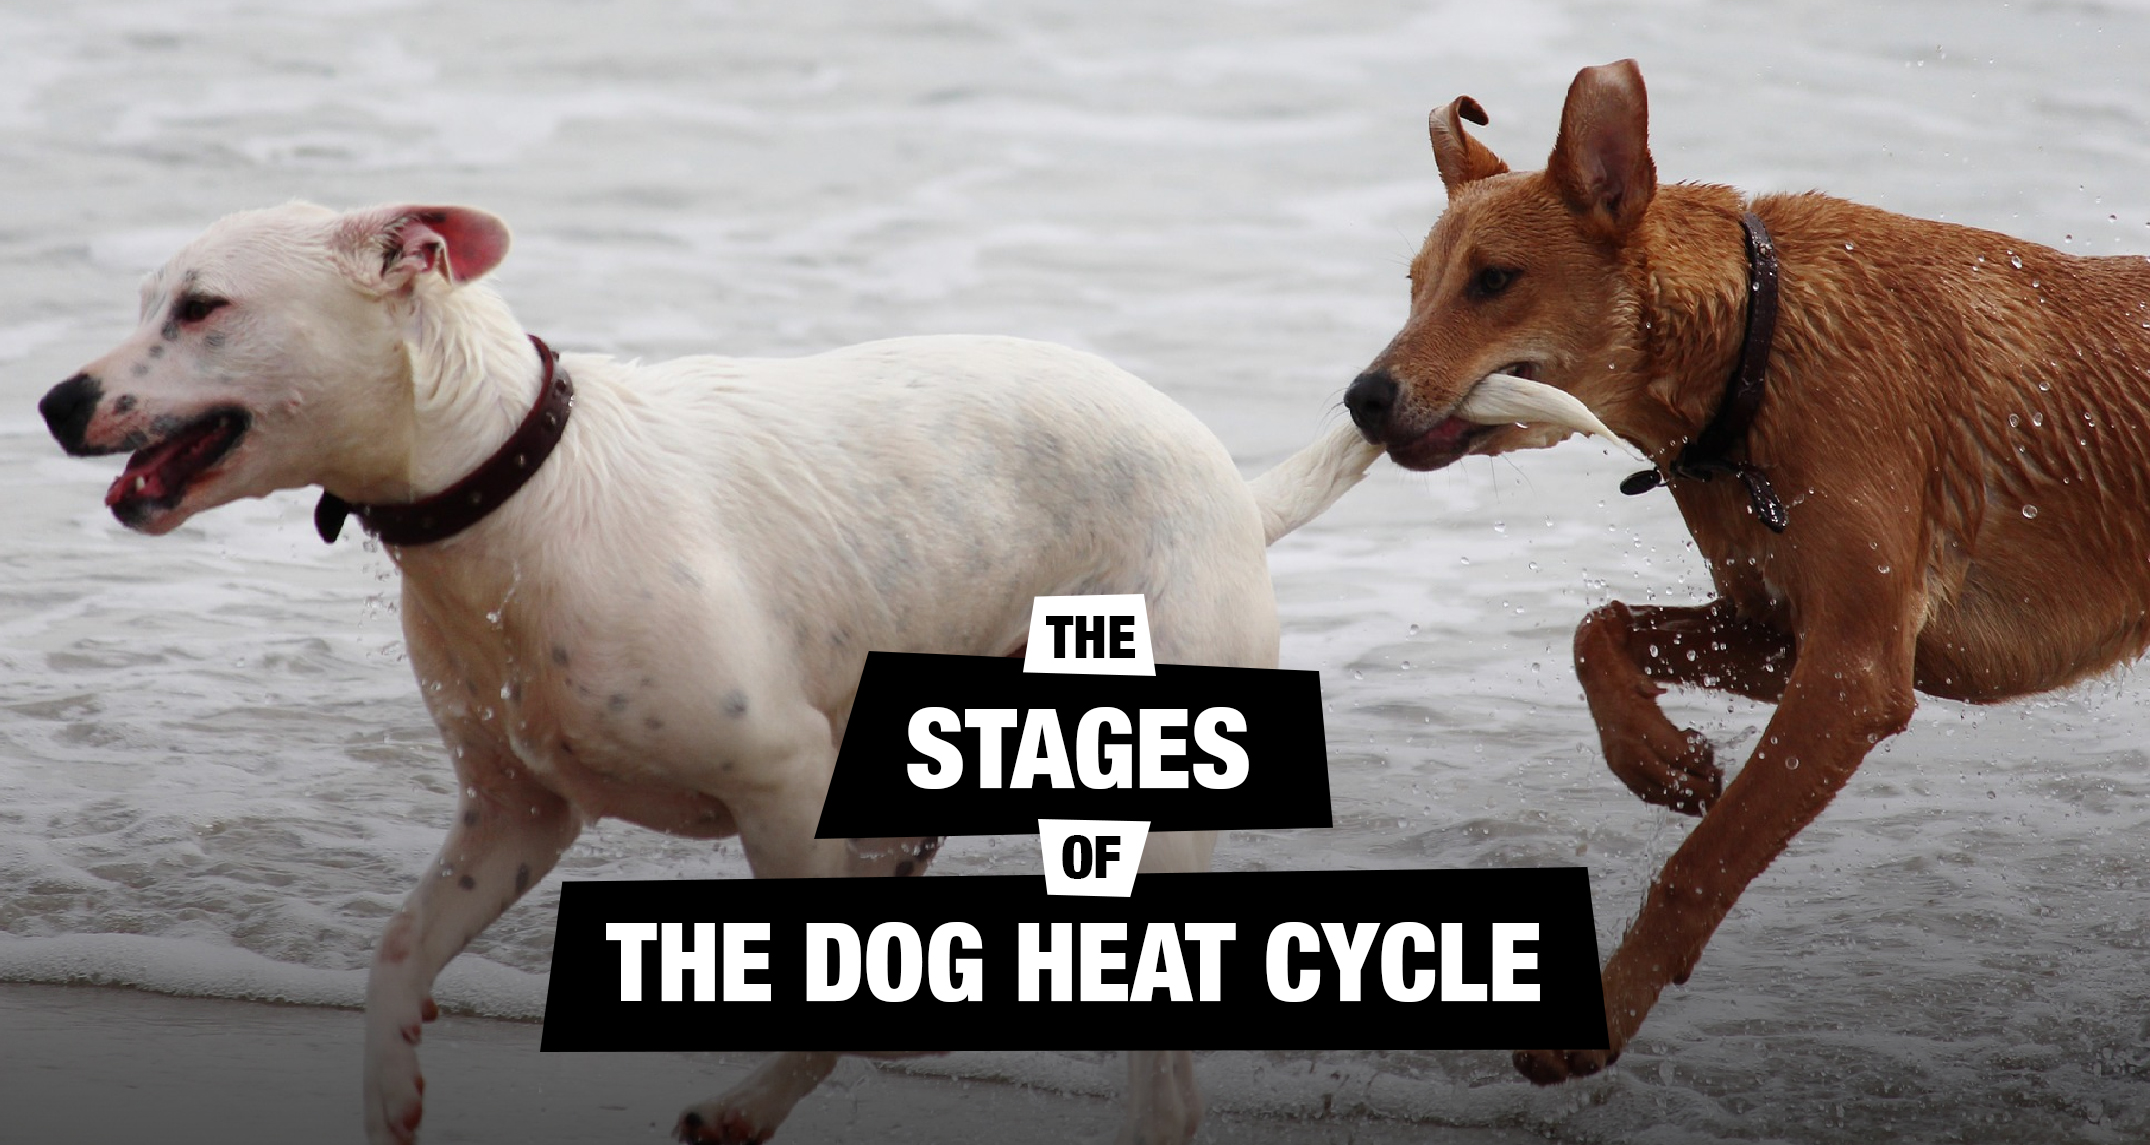 Understanding The Dog Heat Cycle Stages Signs,Beginner Crochet Braid Patterns